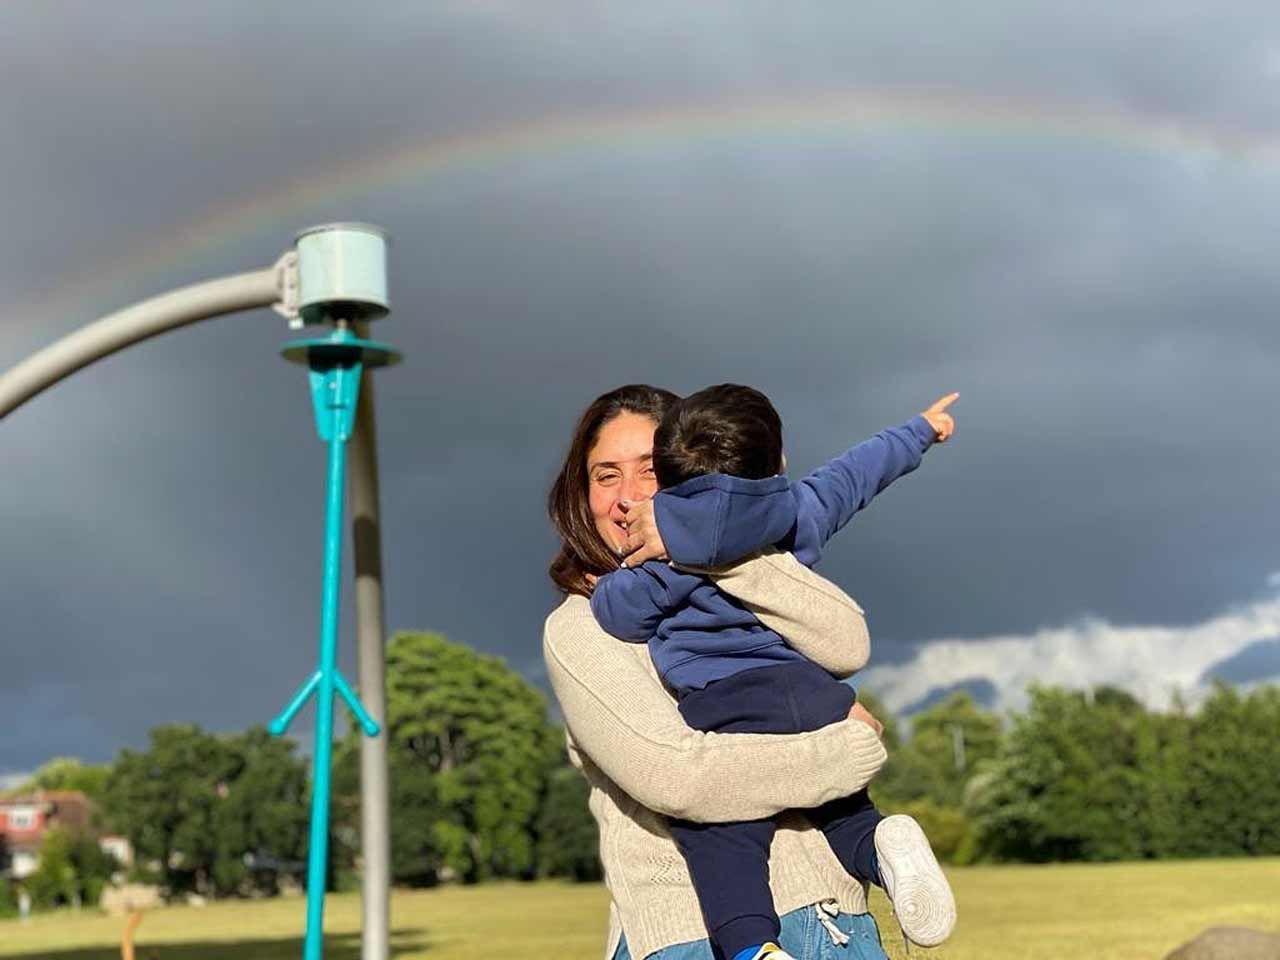 Earlier, Kareena Kapoor Khan shared a pretty picture with Jeh baba where the duo is seen enjoying a rainbow in England